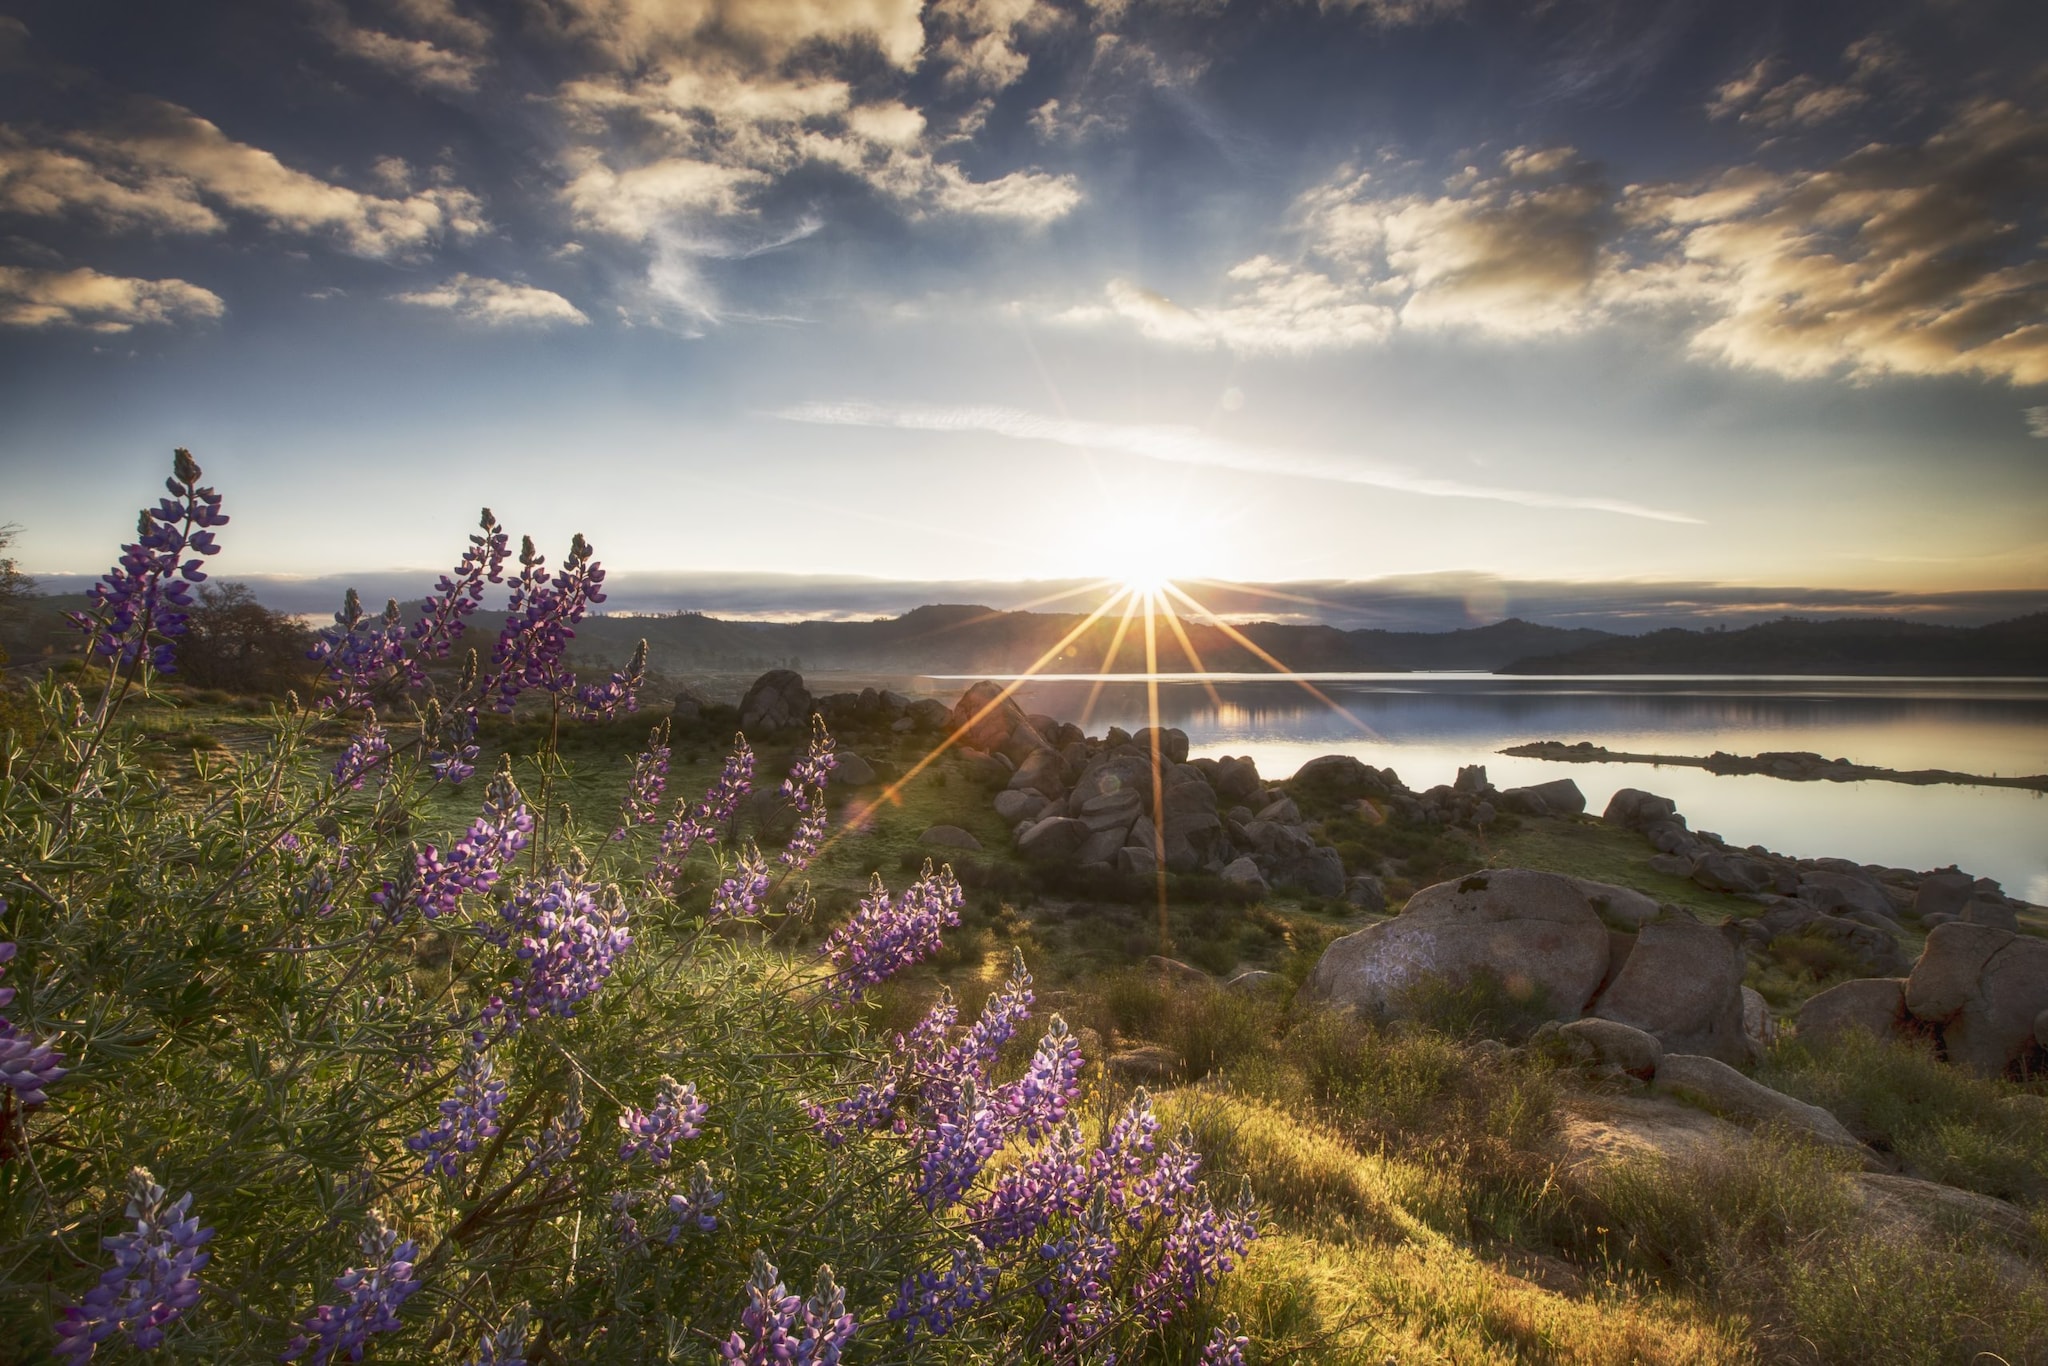 A sunbeam shining over a landscape of mountains, water, rocks, and flowers